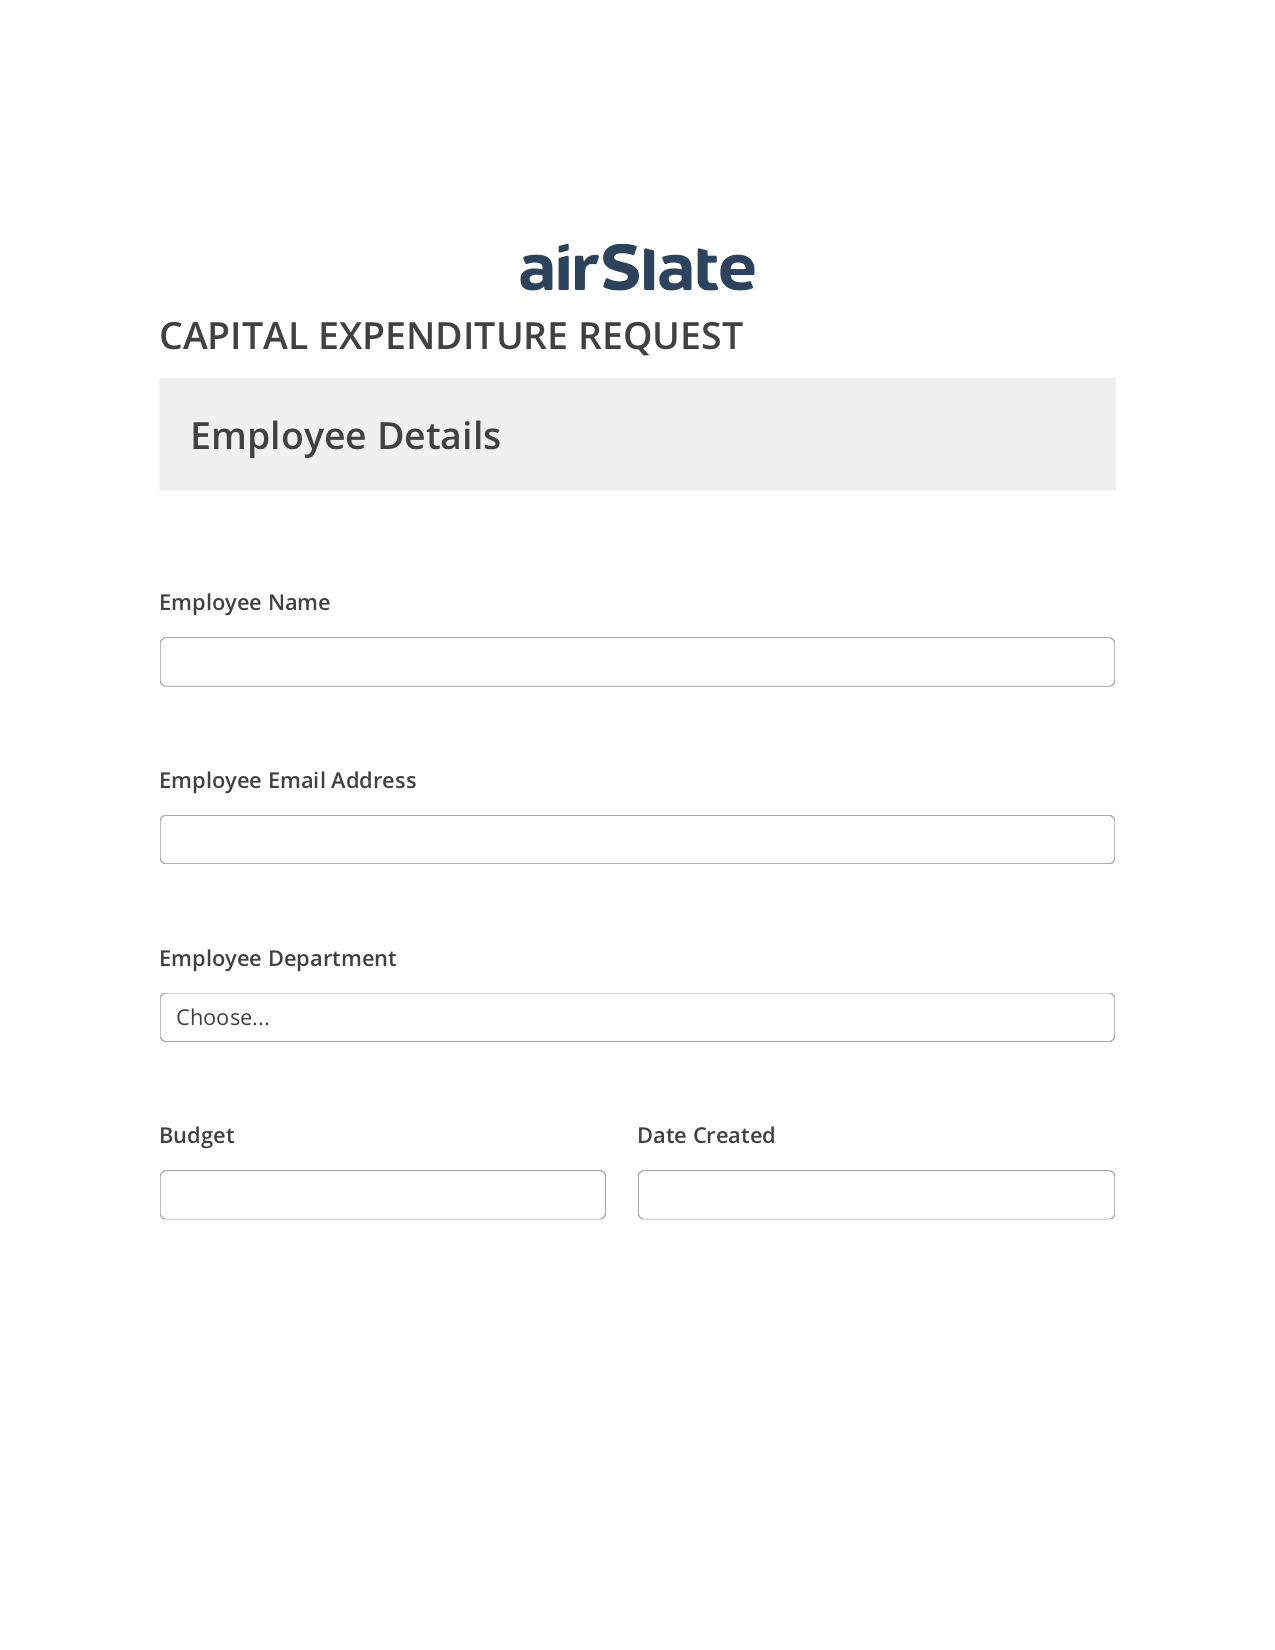 Capital Expenditure Request Approval Workflow Pre-fill from CSV File Dropdown Options Bot, Assign Roles to Recipients Bot, Webhook Postfinish